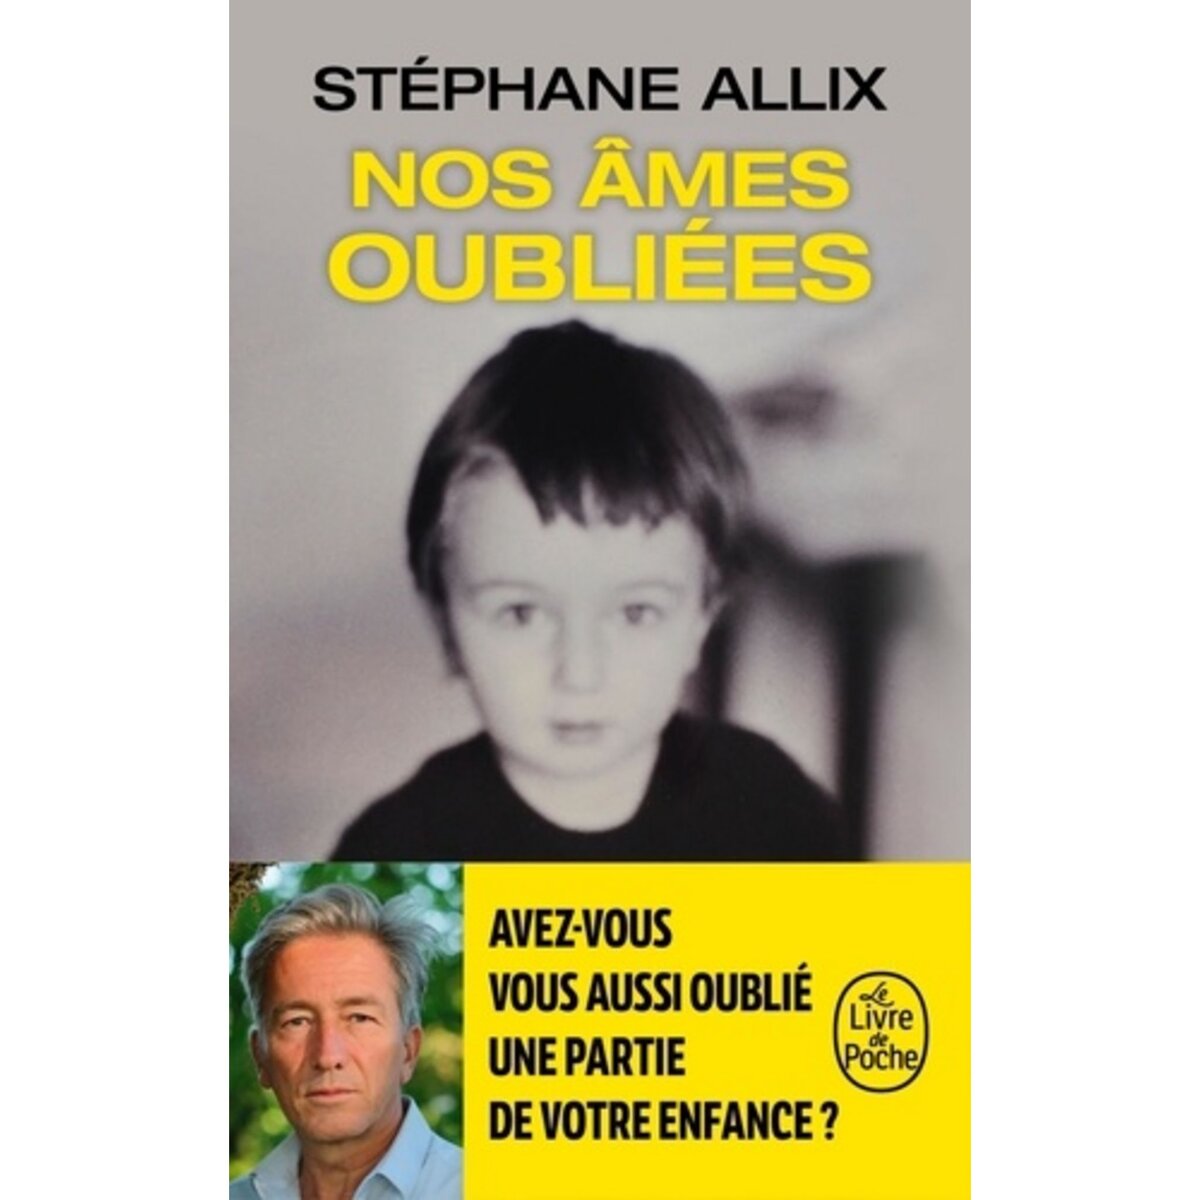  NOS AMES OUBLIEES, Allix Stéphane